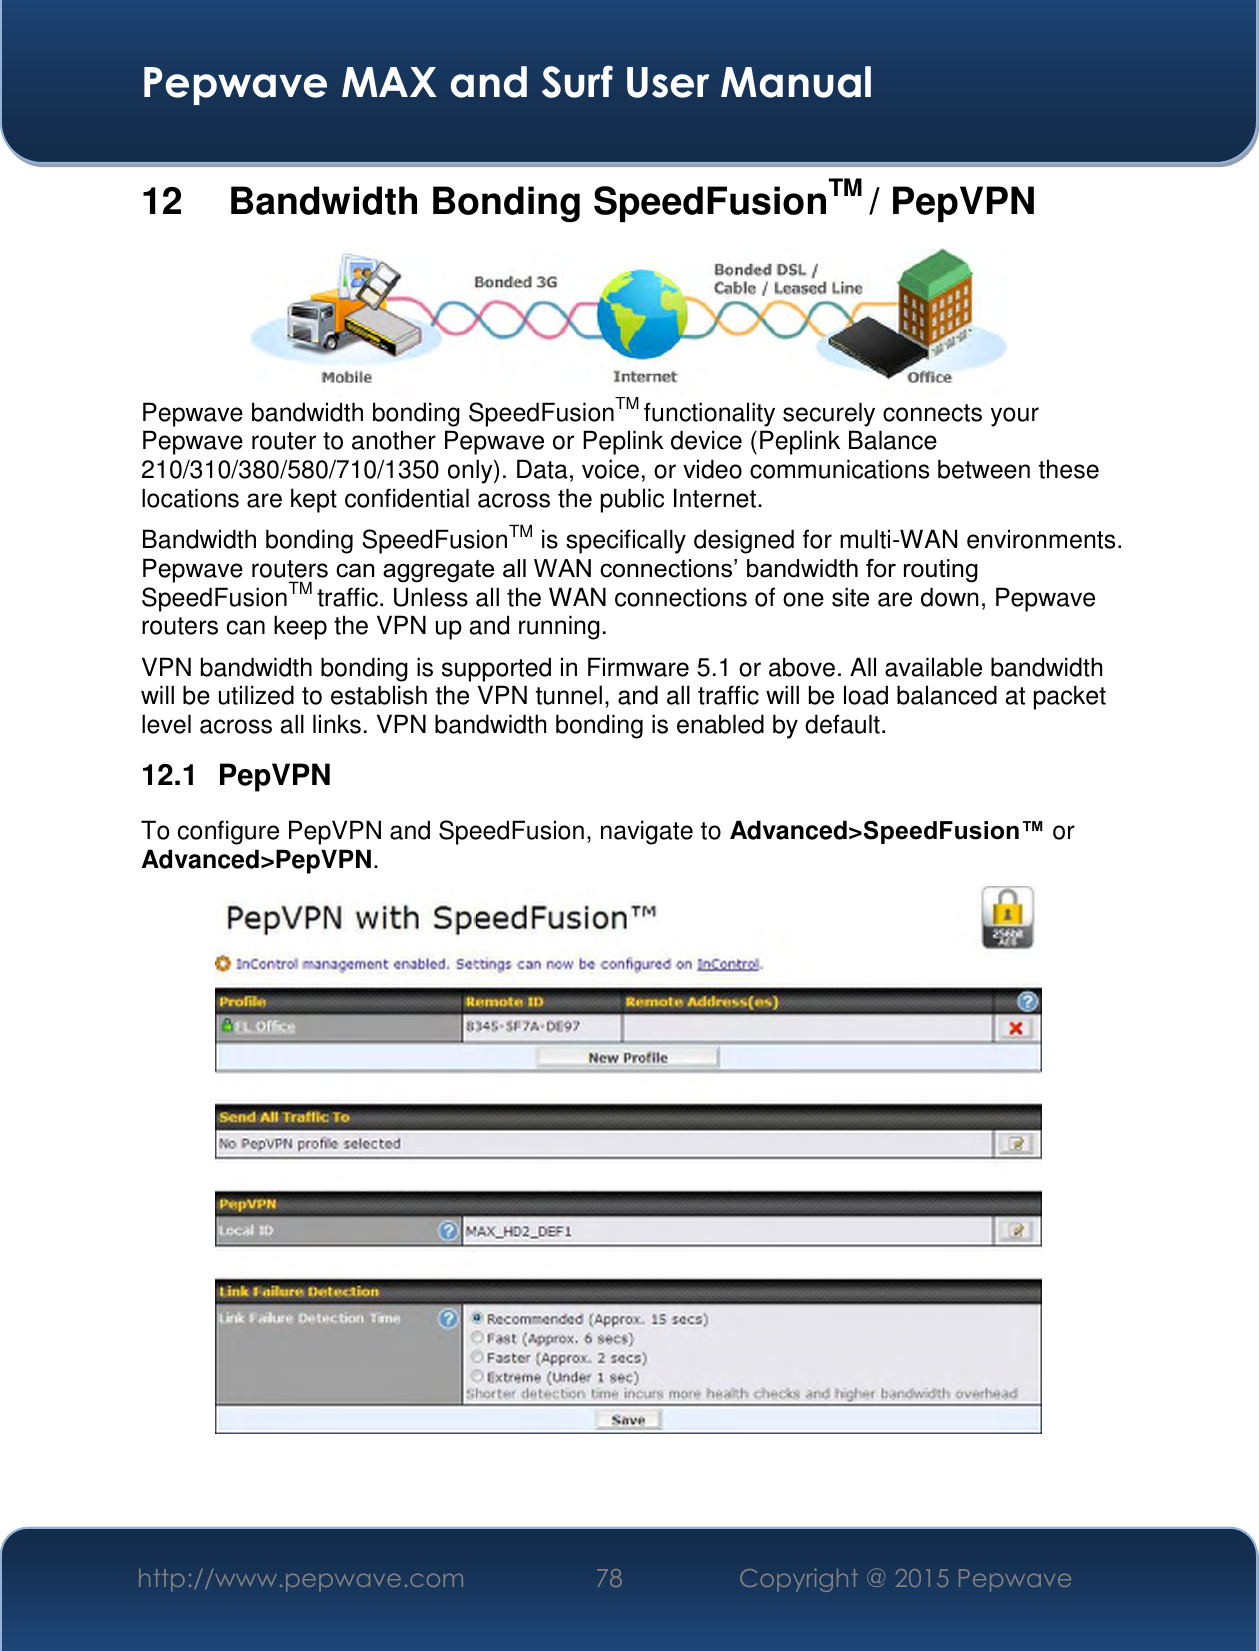  Pepwave MAX and Surf User Manual http://www.pepwave.com 78   Copyright @ 2015 Pepwave   12   Bandwidth Bonding SpeedFusionTM / PepVPN  Pepwave bandwidth bonding SpeedFusionTM functionality securely connects your Pepwave router to another Pepwave or Peplink device (Peplink Balance 210/310/380/580/710/1350 only). Data, voice, or video communications between these locations are kept confidential across the public Internet. Bandwidth bonding SpeedFusionTM is specifically designed for multi-WAN environments. Pepwave routers can aggregate all WAN connections’ bandwidth for routing SpeedFusionTM traffic. Unless all the WAN connections of one site are down, Pepwave routers can keep the VPN up and running. VPN bandwidth bonding is supported in Firmware 5.1 or above. All available bandwidth will be utilized to establish the VPN tunnel, and all traffic will be load balanced at packet level across all links. VPN bandwidth bonding is enabled by default.  12.1  PepVPN To configure PepVPN and SpeedFusion, navigate to Advanced&gt;SpeedFusion™ or Advanced&gt;PepVPN.     